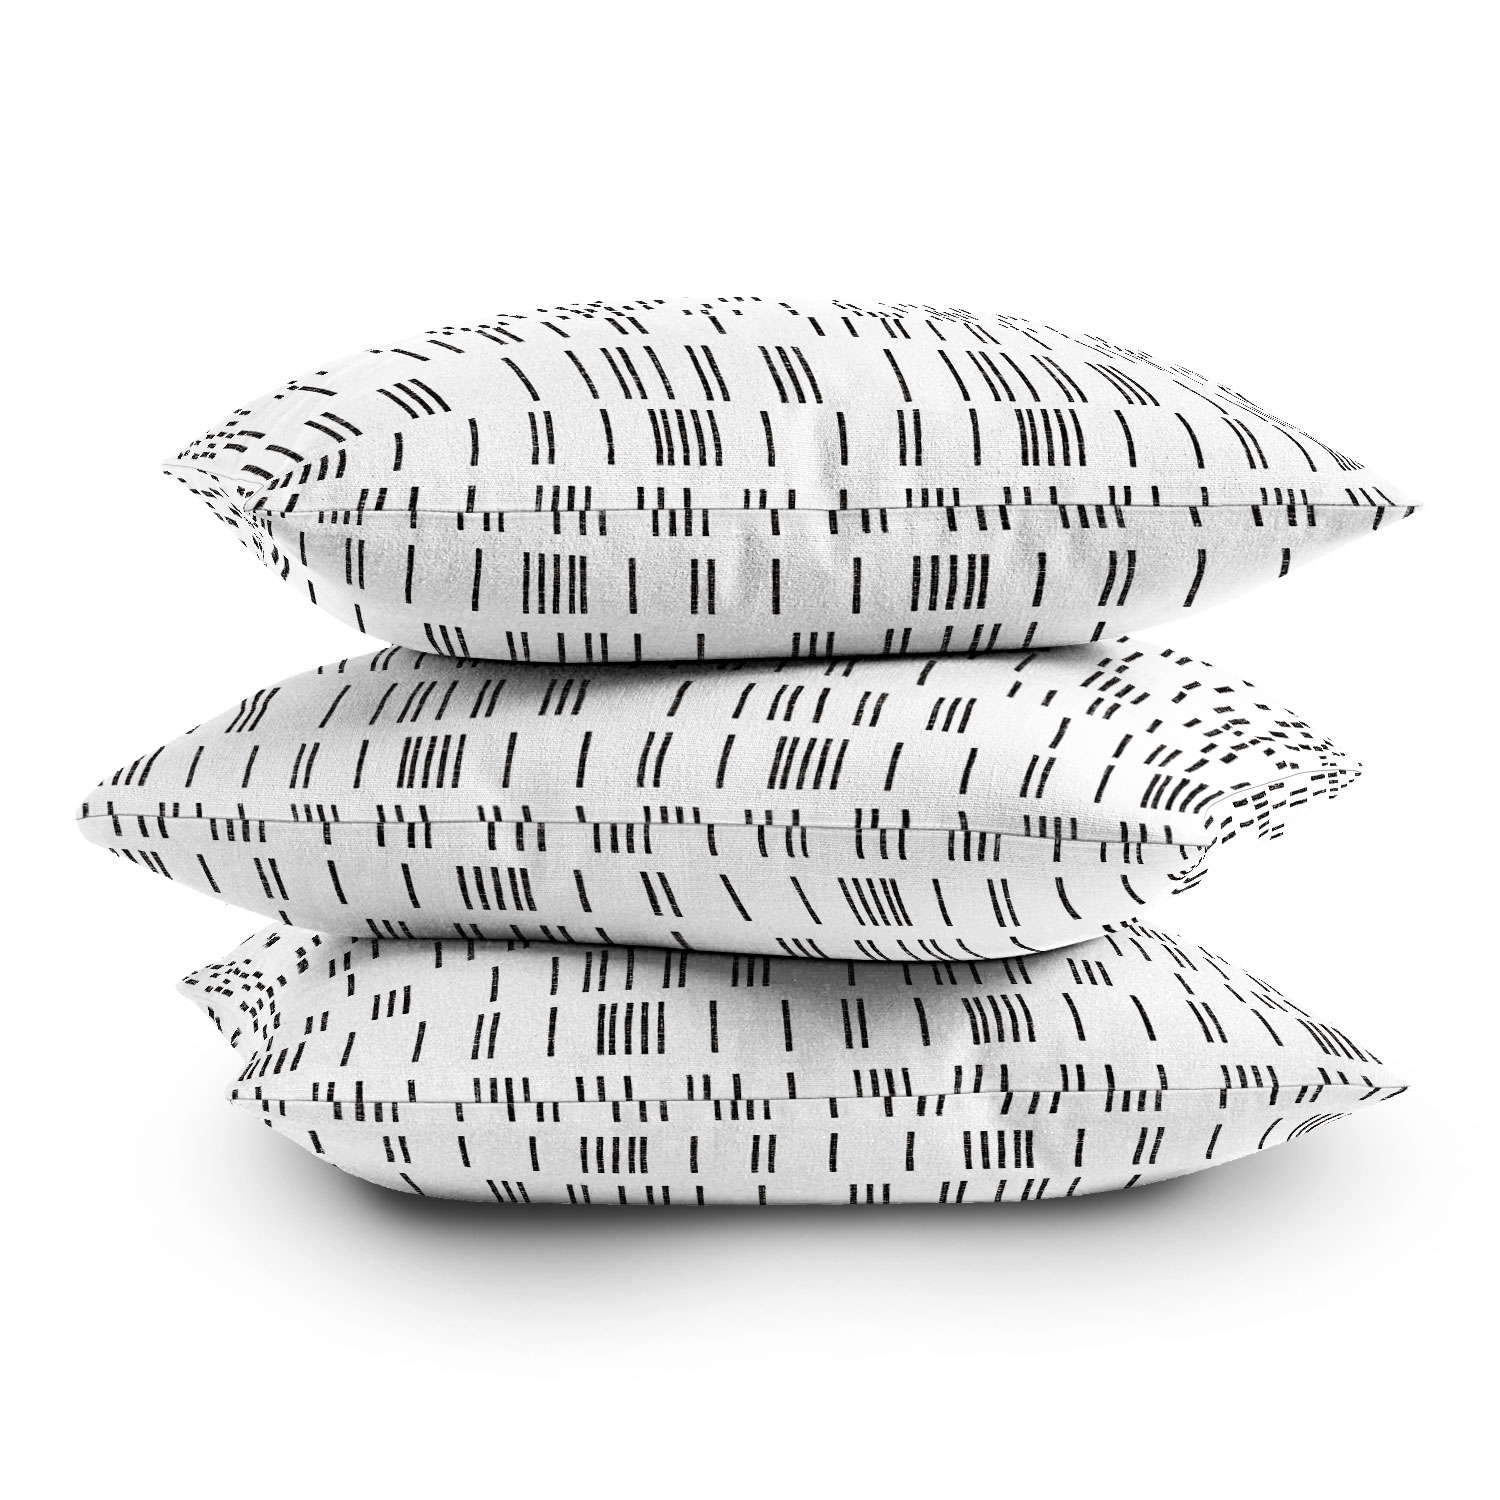 Bogo Mudcloth White by Holli Zollinger - Outdoor Throw Pillow 20" x 20" - Image 3